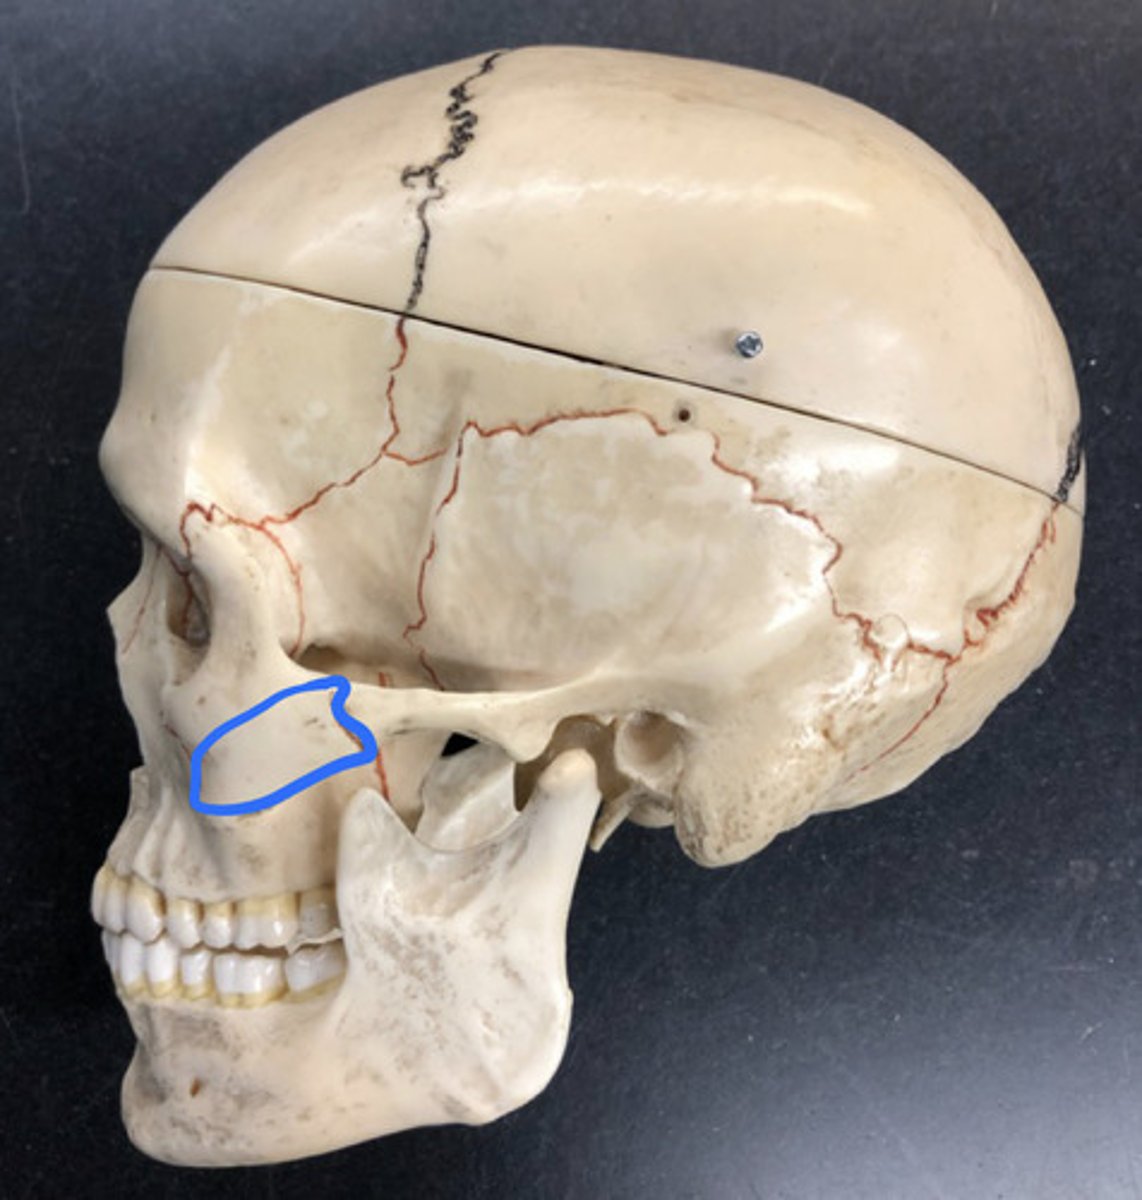 <p>The front part of the zygomatic arch</p>